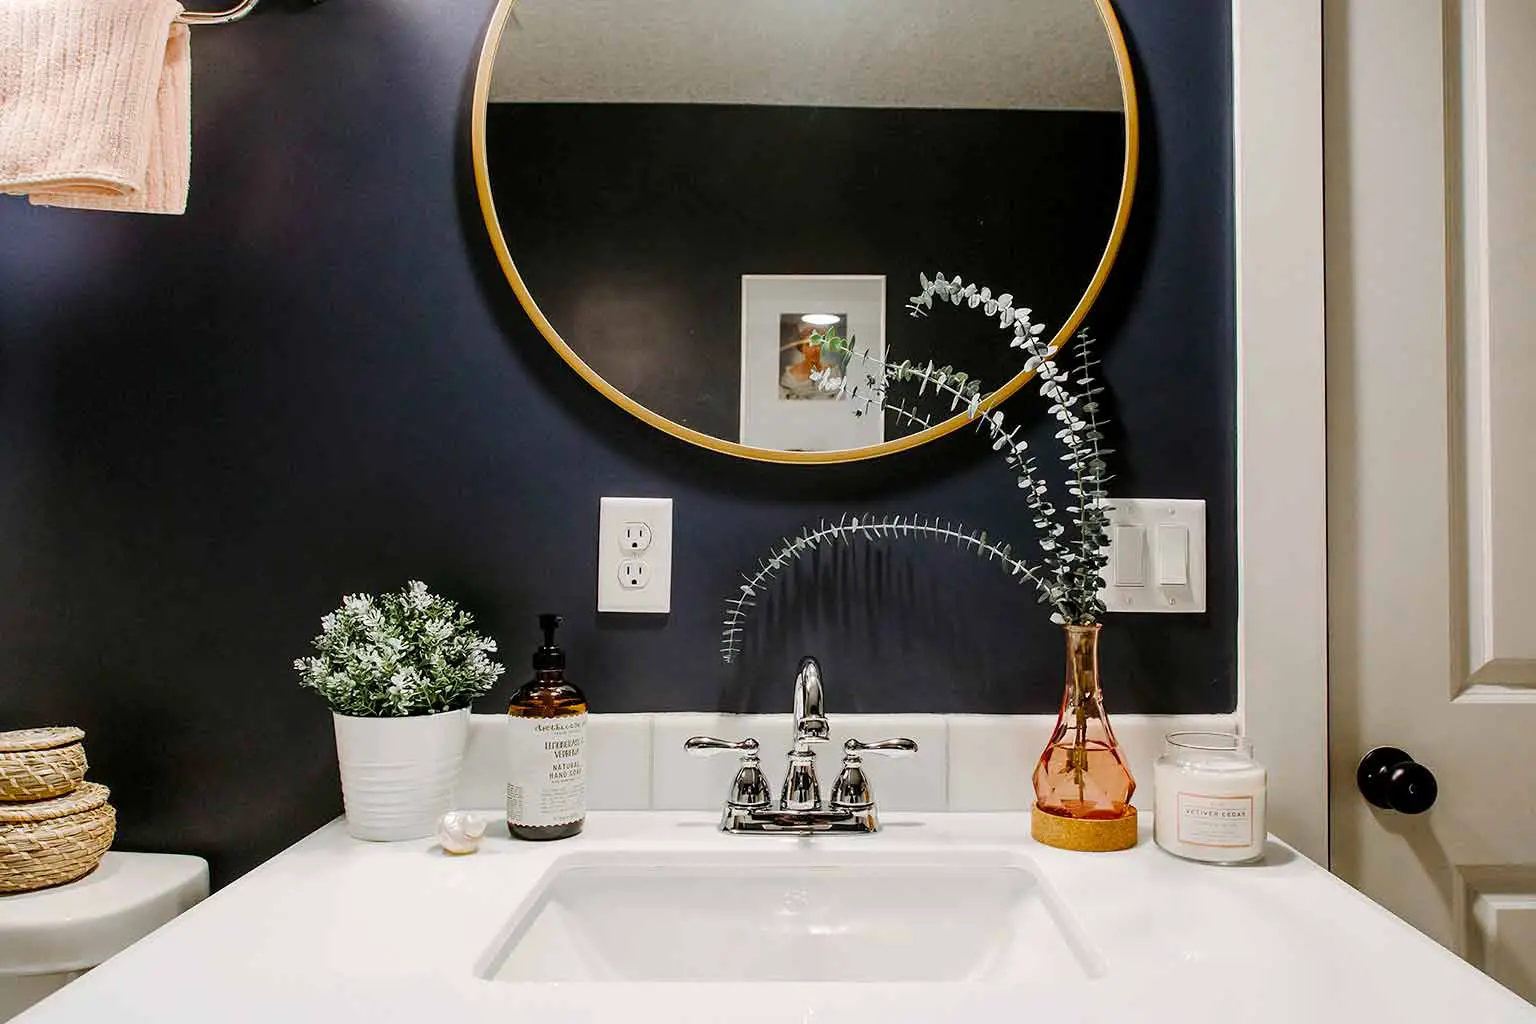 Hale navy bathroom with brass accents and board and batten - The Guest House Reveal - That Homebird Life Blog